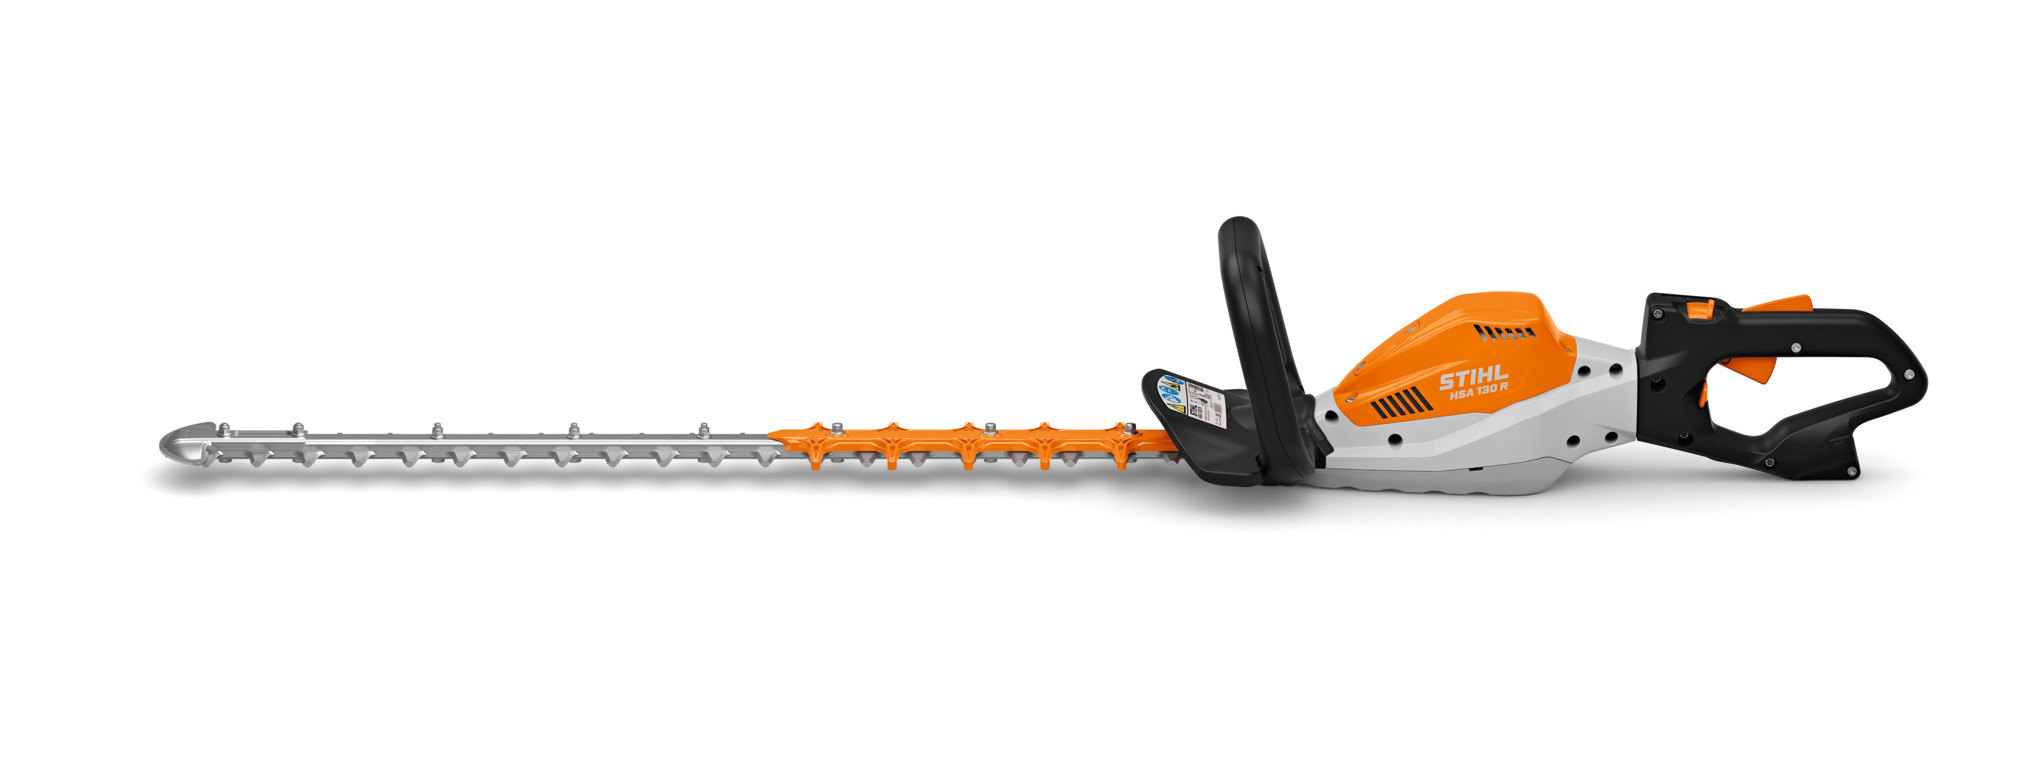 HSA 130 R Cordless Hedge Trimmer